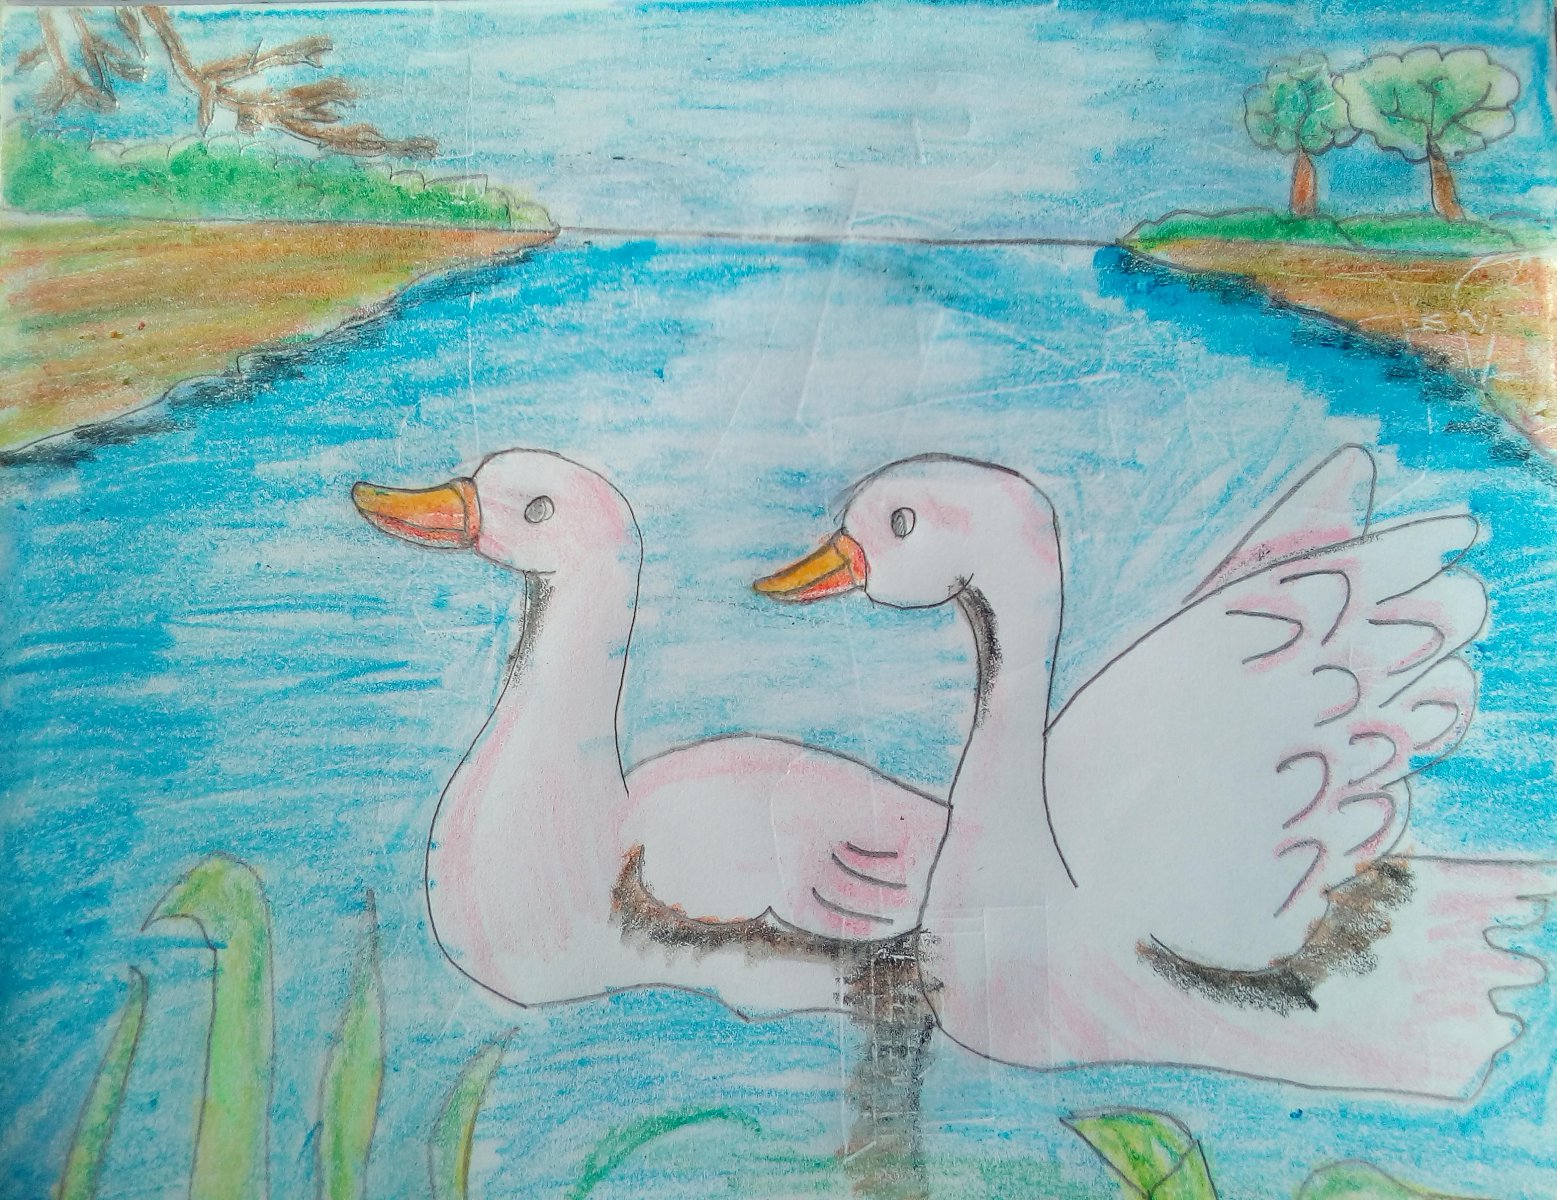 Duck scenery drawing by hand - Scenery Arts - Drawings & Illustration,  Animals, Birds, & Fish, Birds, Ducks & Loons, Other Ducks & Loons - ArtPal